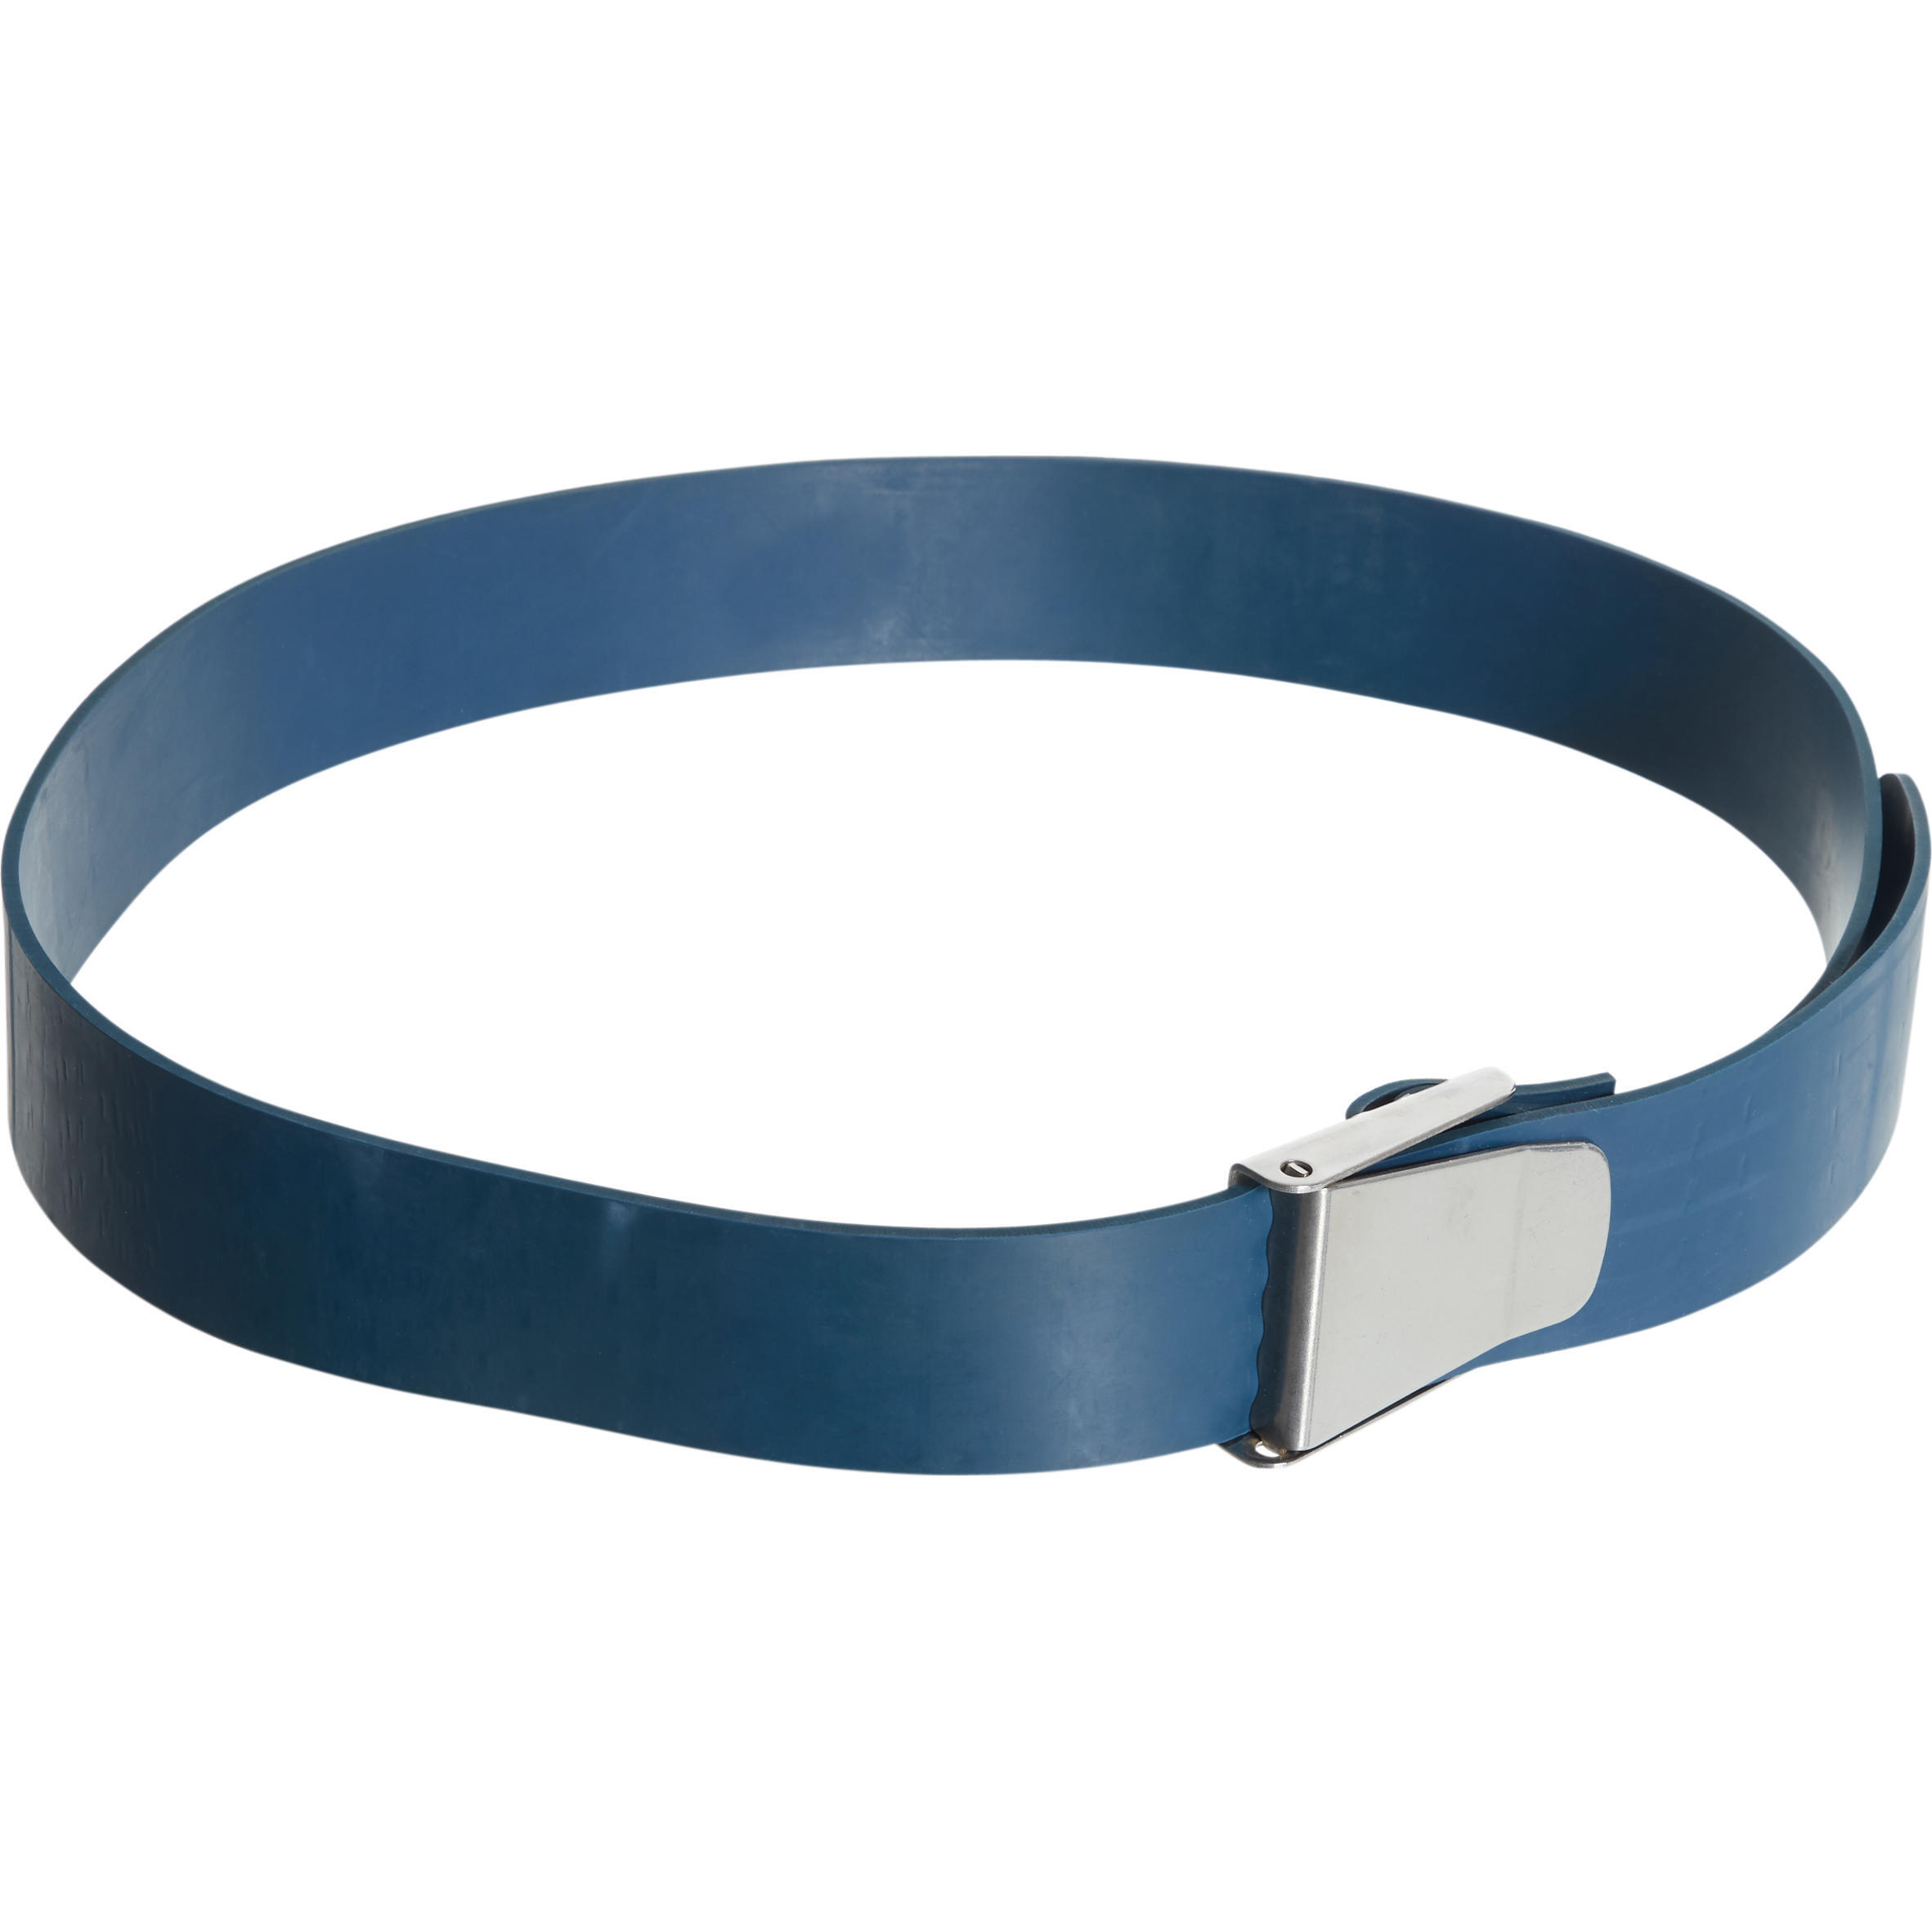 Freediving FRD500 rubber weight belt with metal buckle - Blue 4/4